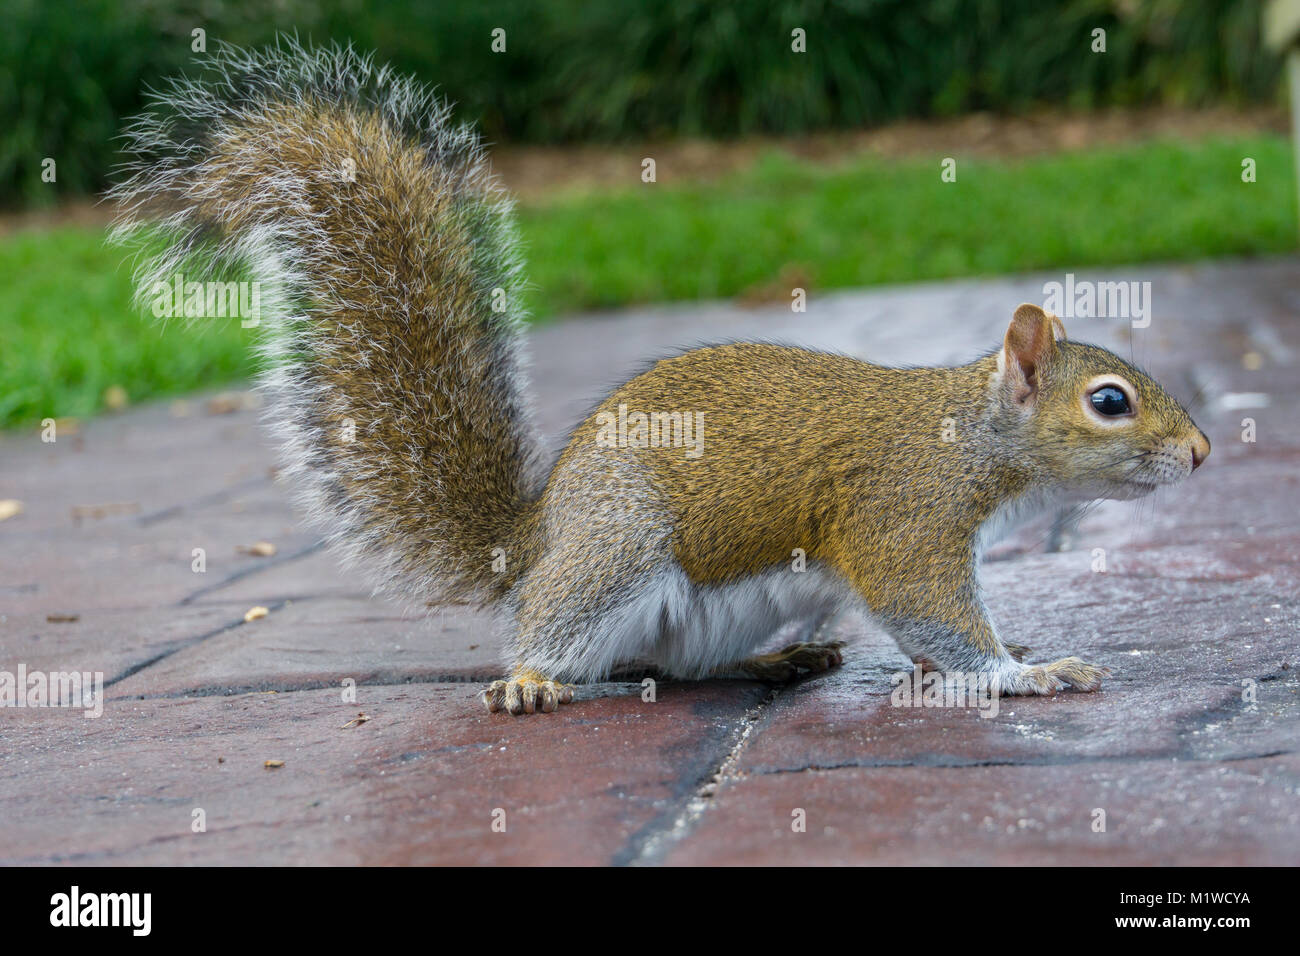 USA, Florida, Side view of a brown squirrel with upright tail and bushy fur Stock Photo